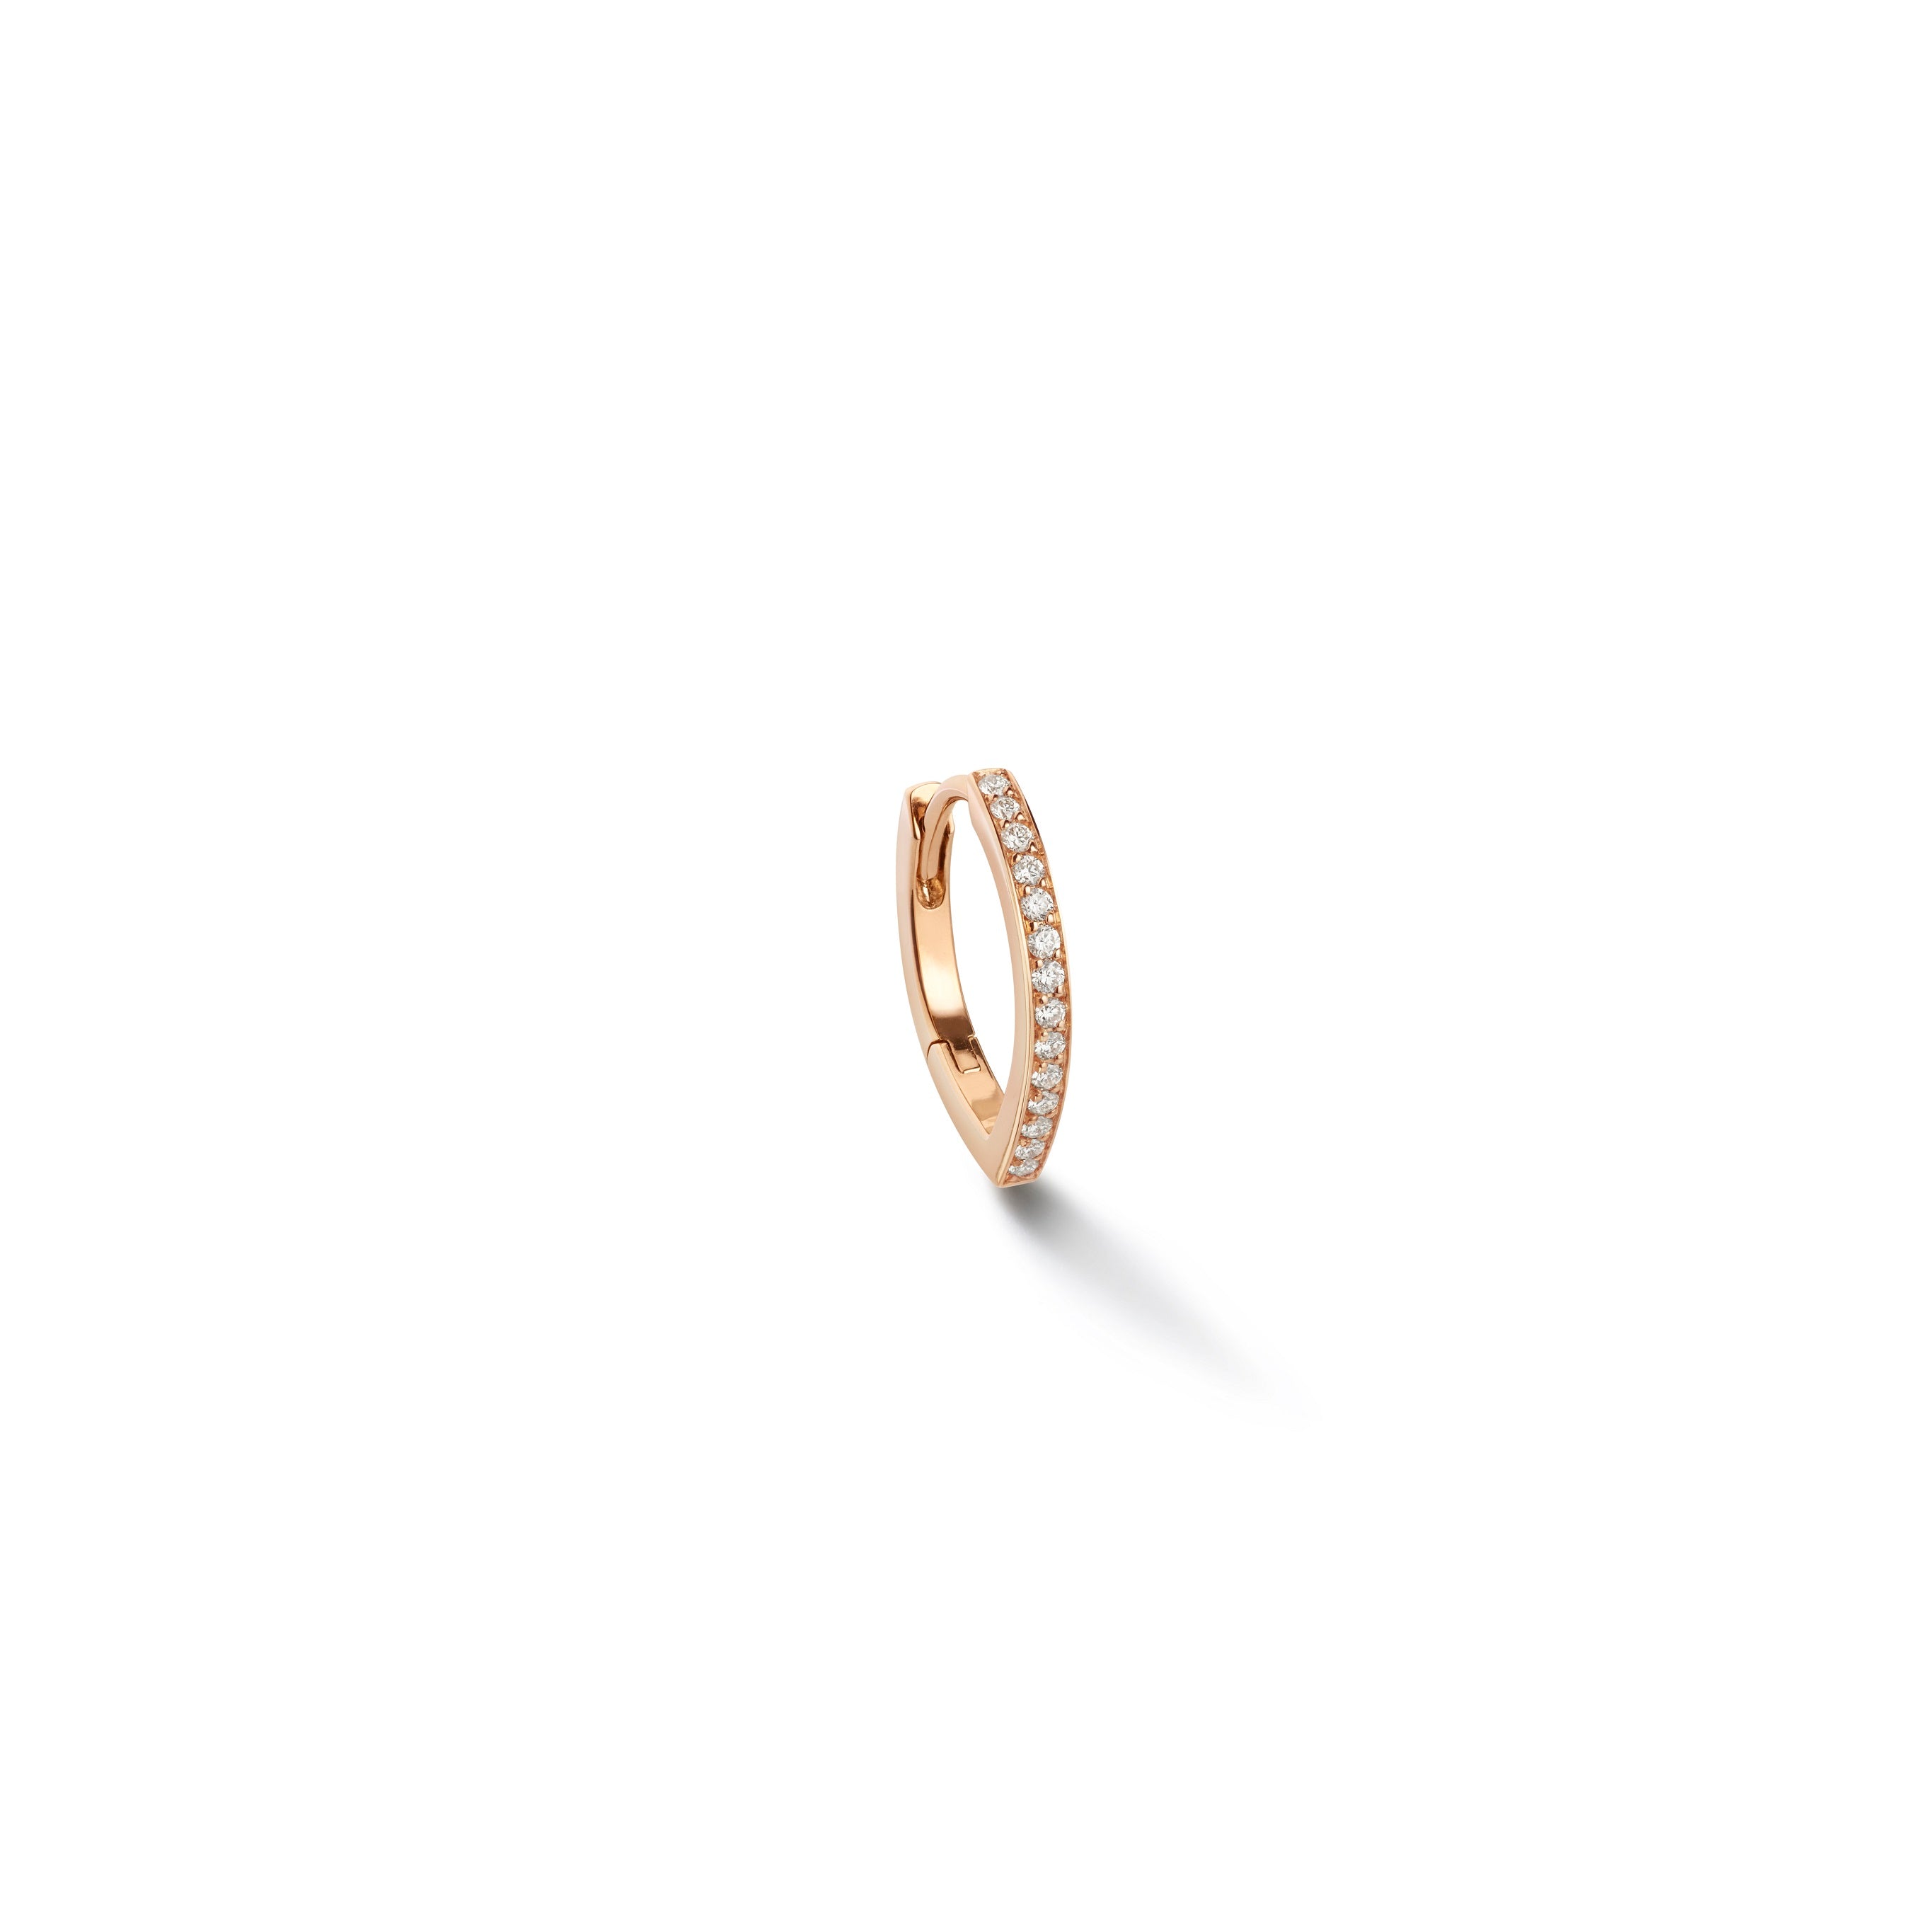 Antifer earring in pink gold paved with diamonds